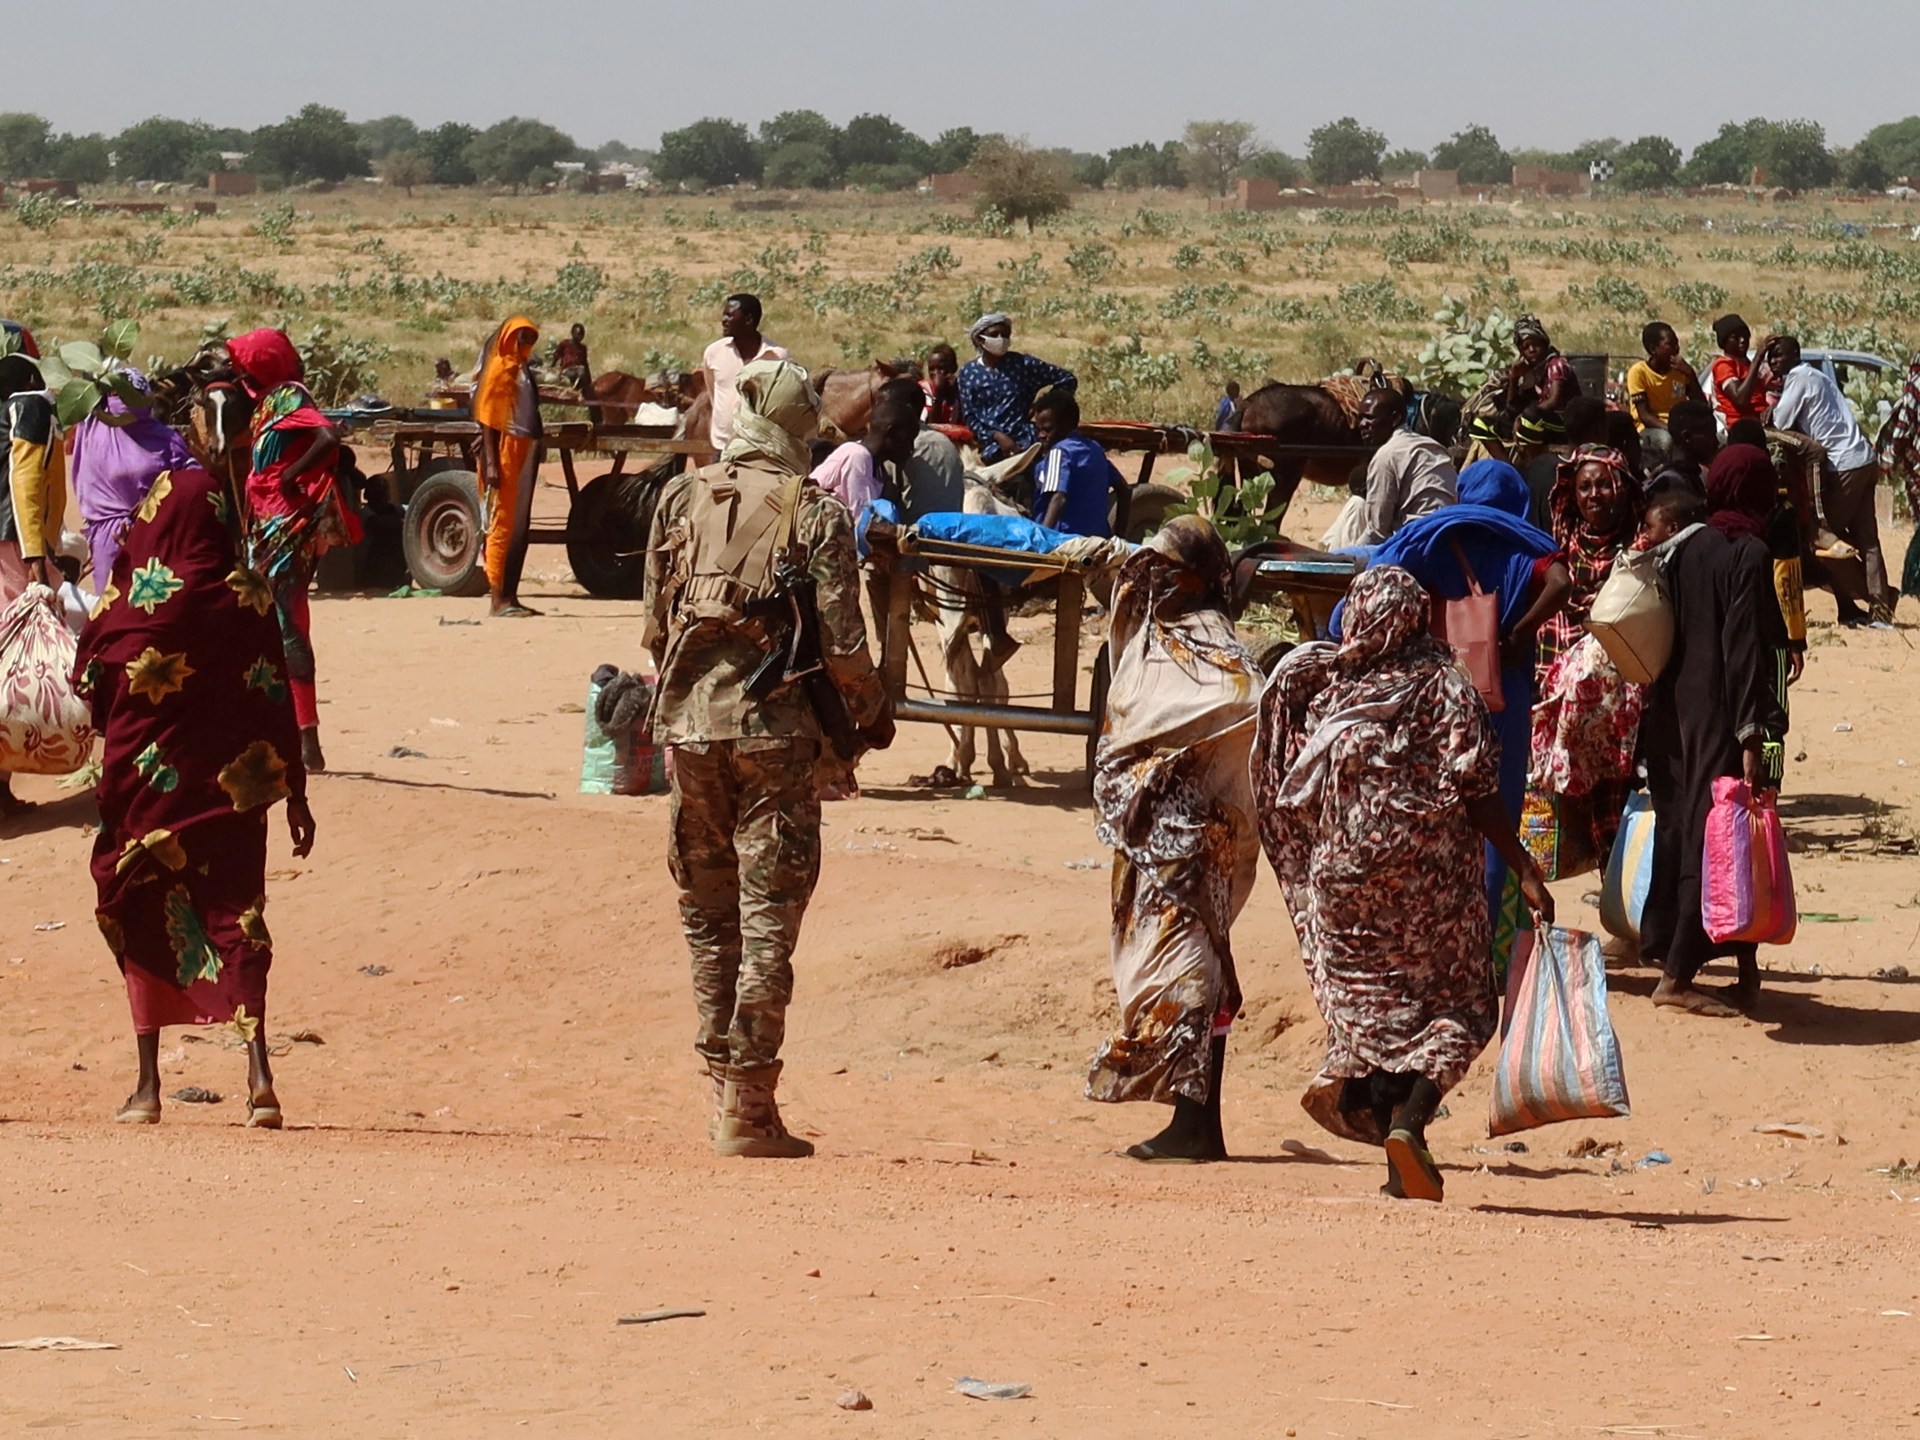 US declares warring factions in Sudan have committed war crimes | Crimes Against Humanity News